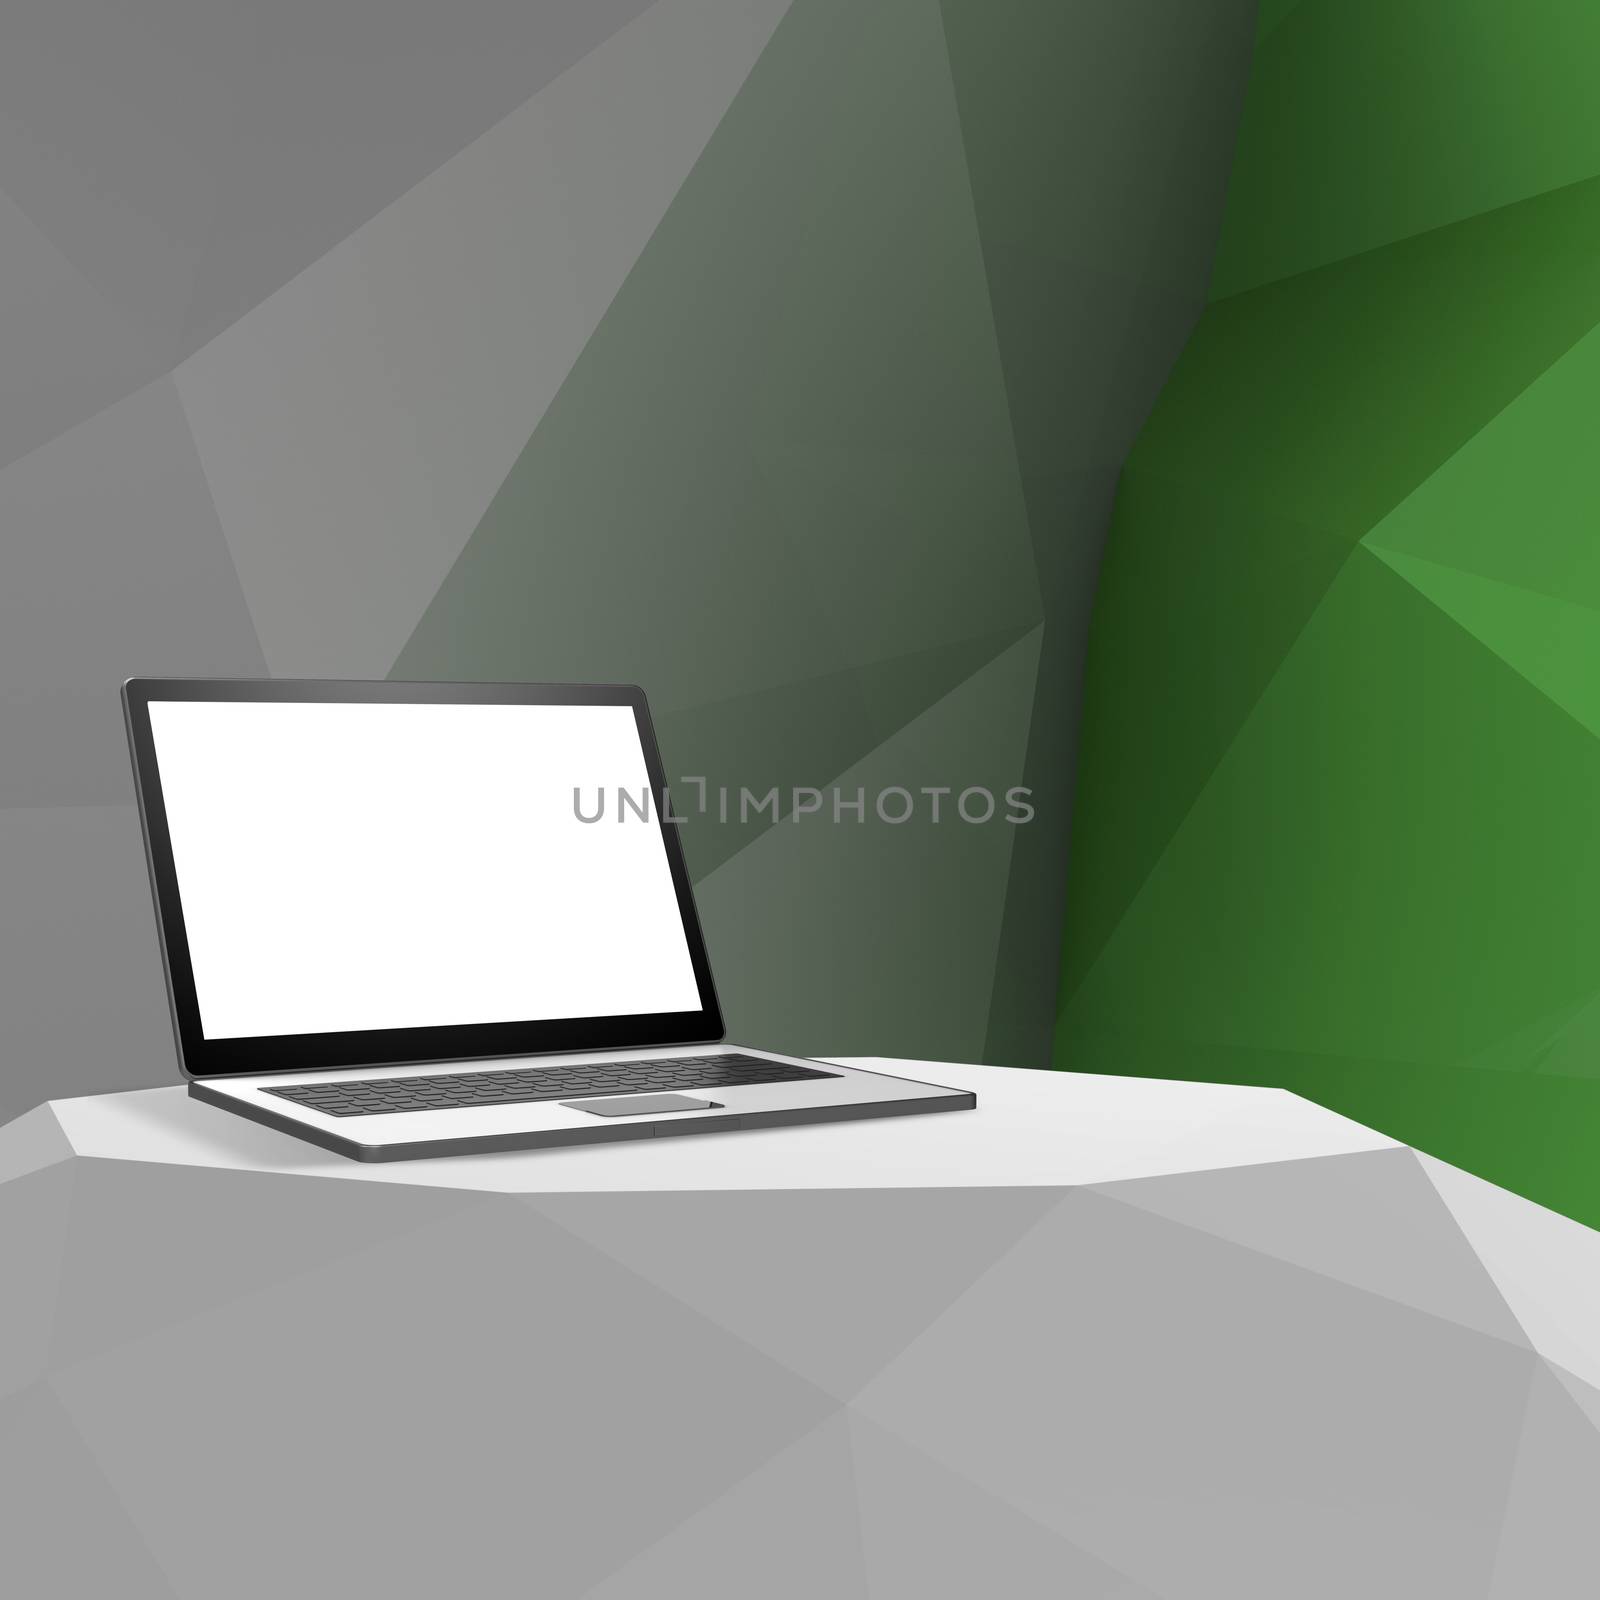 Laptop with blank screen on laminate table and low poly geometric background